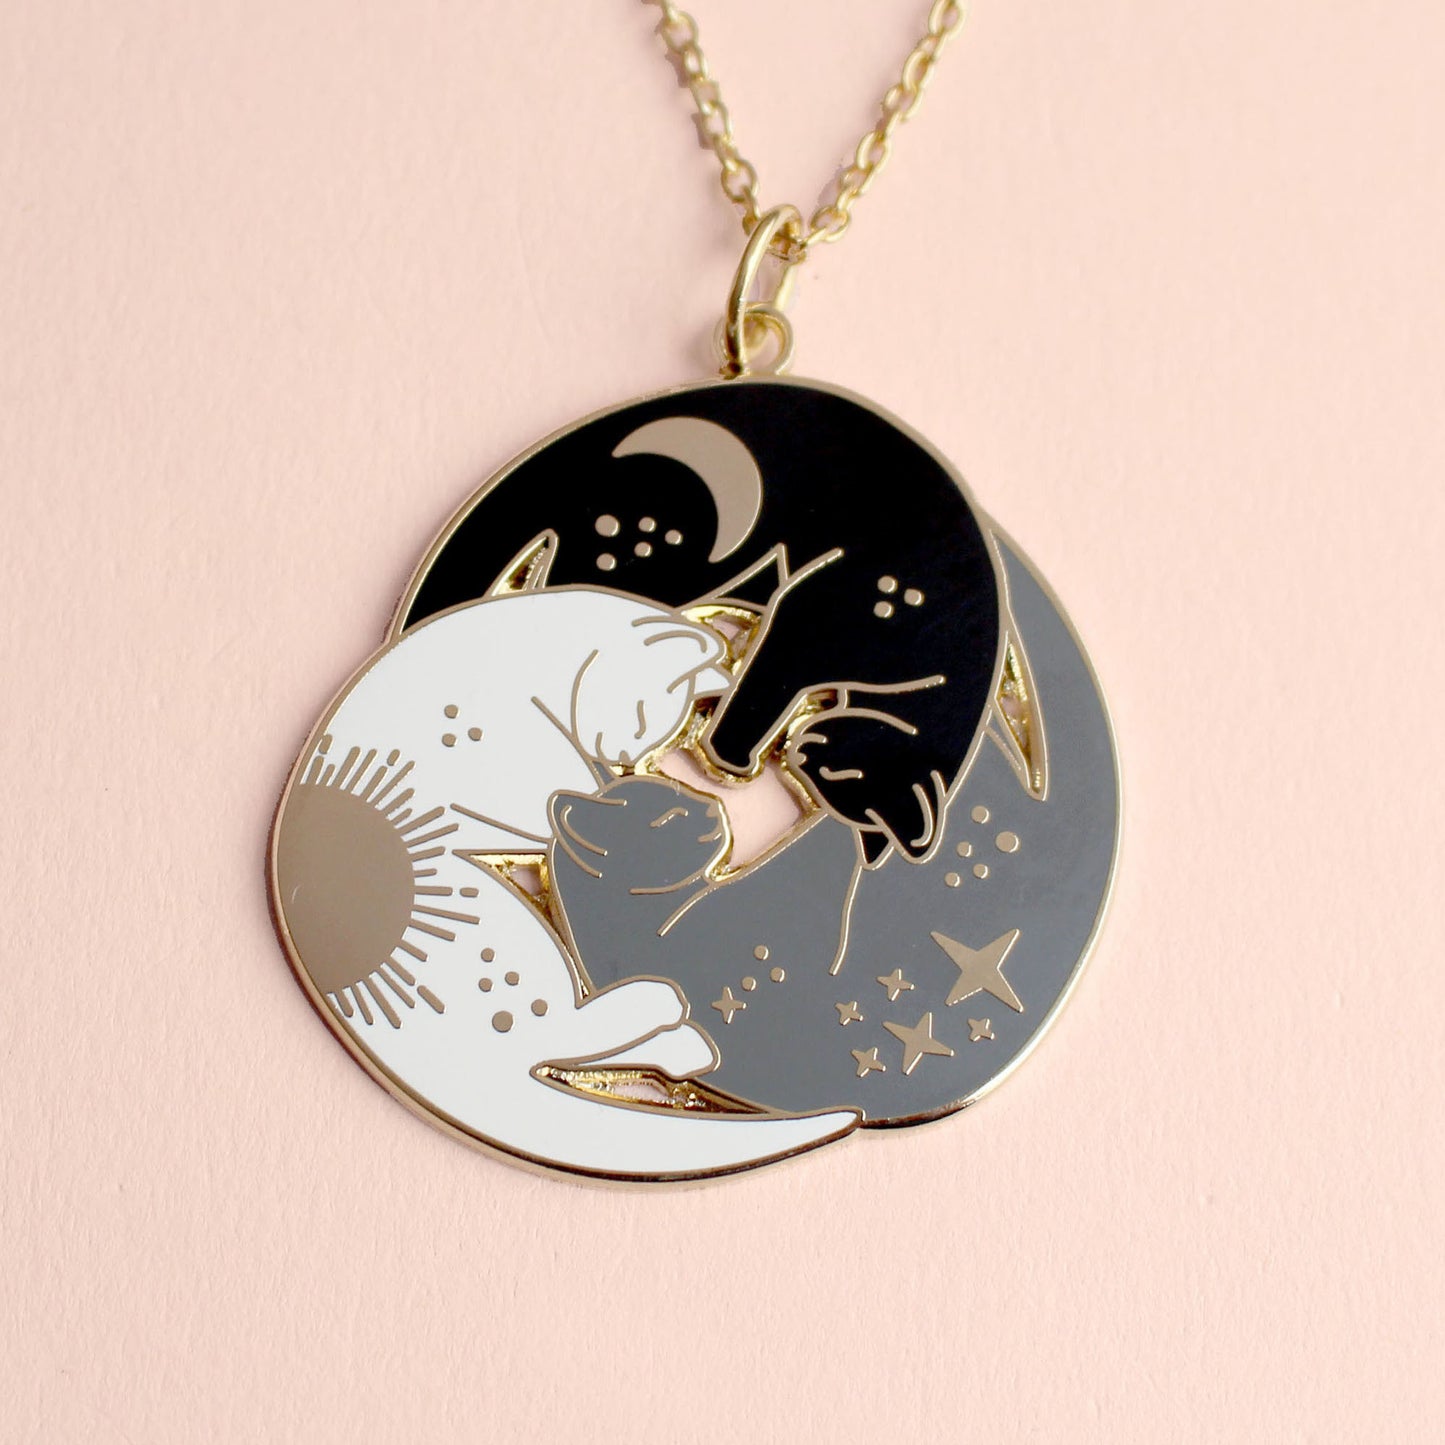 Trio of Cats Necklace